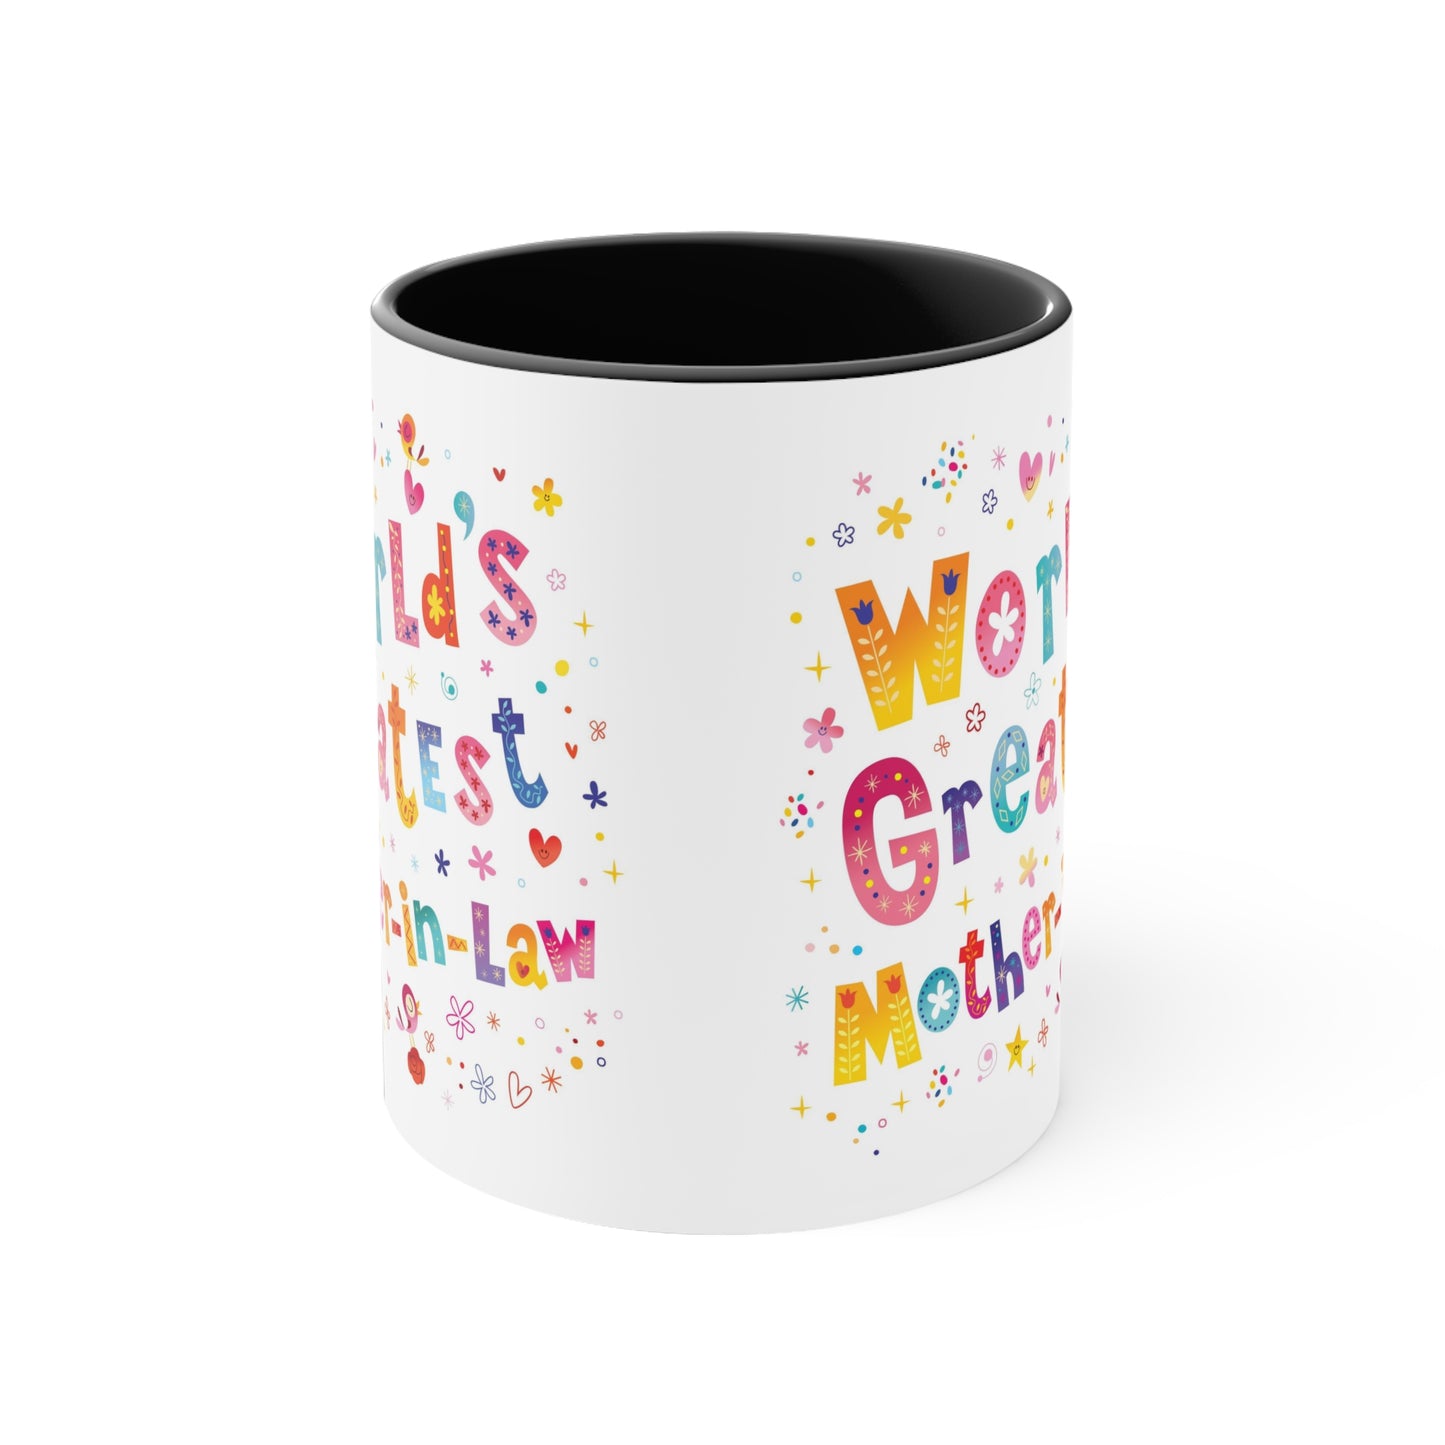 World's Greatest Mother-In-Law Accent Coffee Mug, 11oz